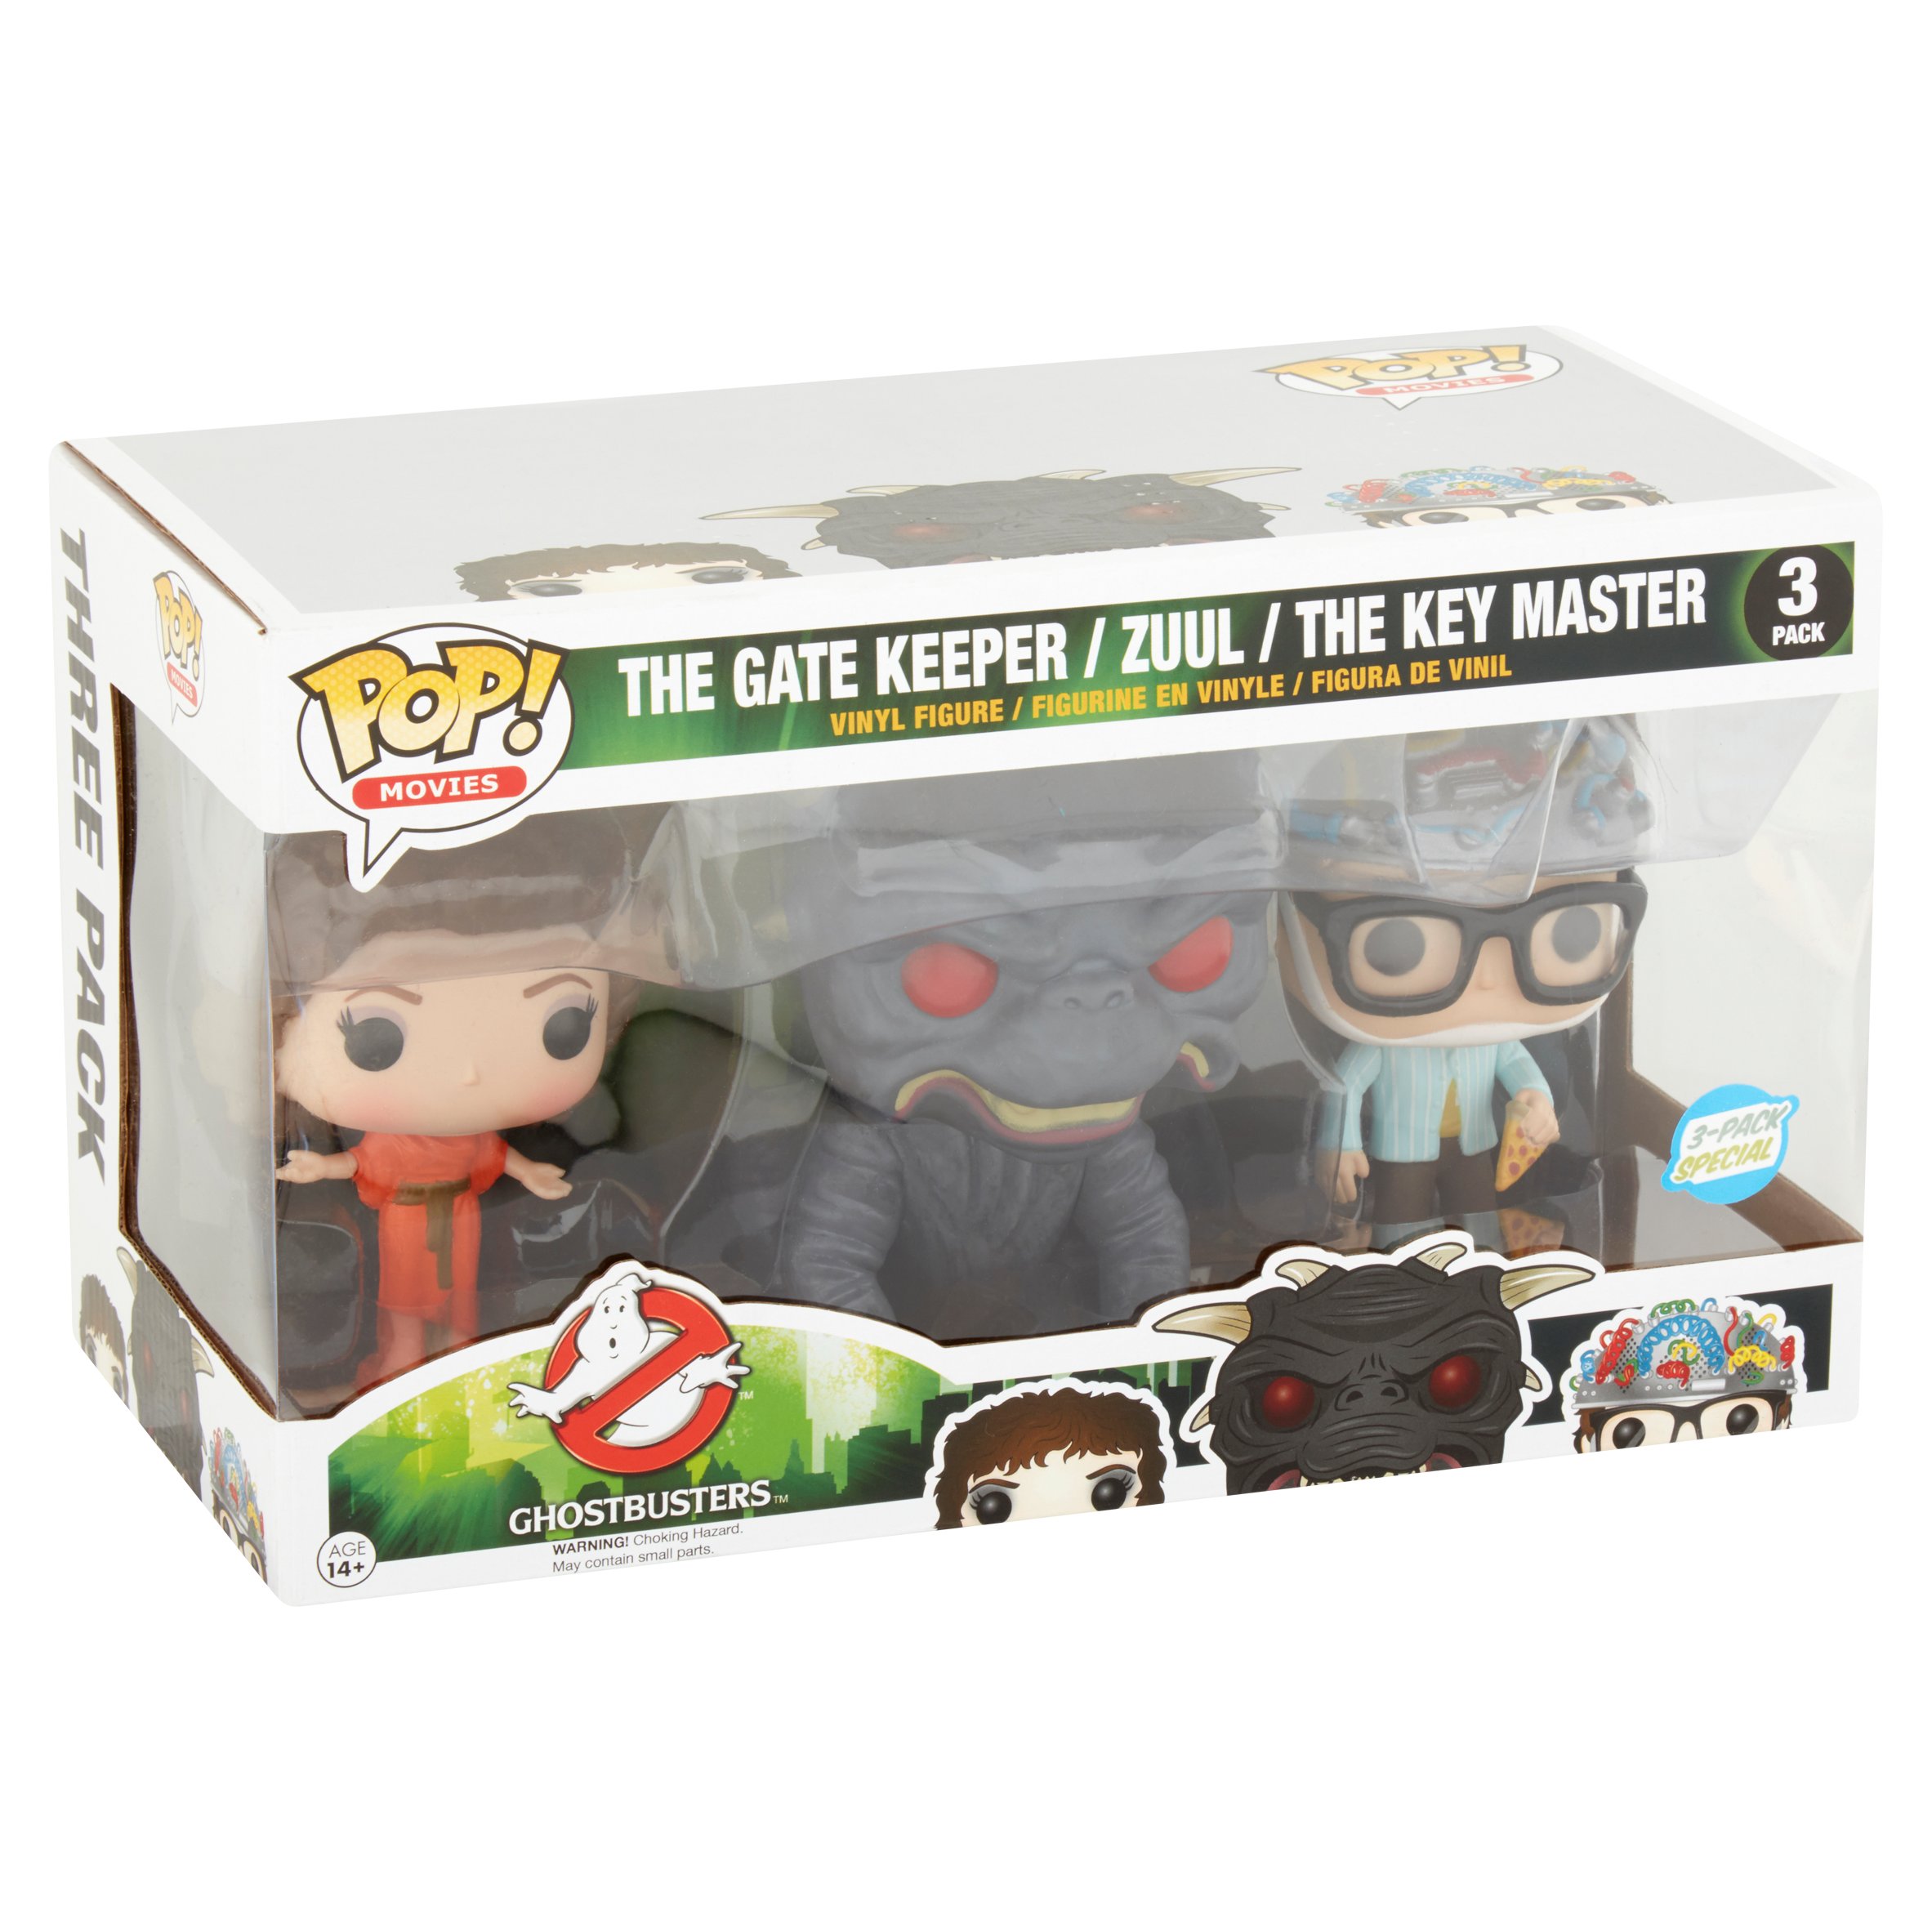 POP Movies: Classic Ghostbusters 3 Pack Walmart Exclusive, The Gatekeeper, Zuul, The Key Master - image 5 of 6